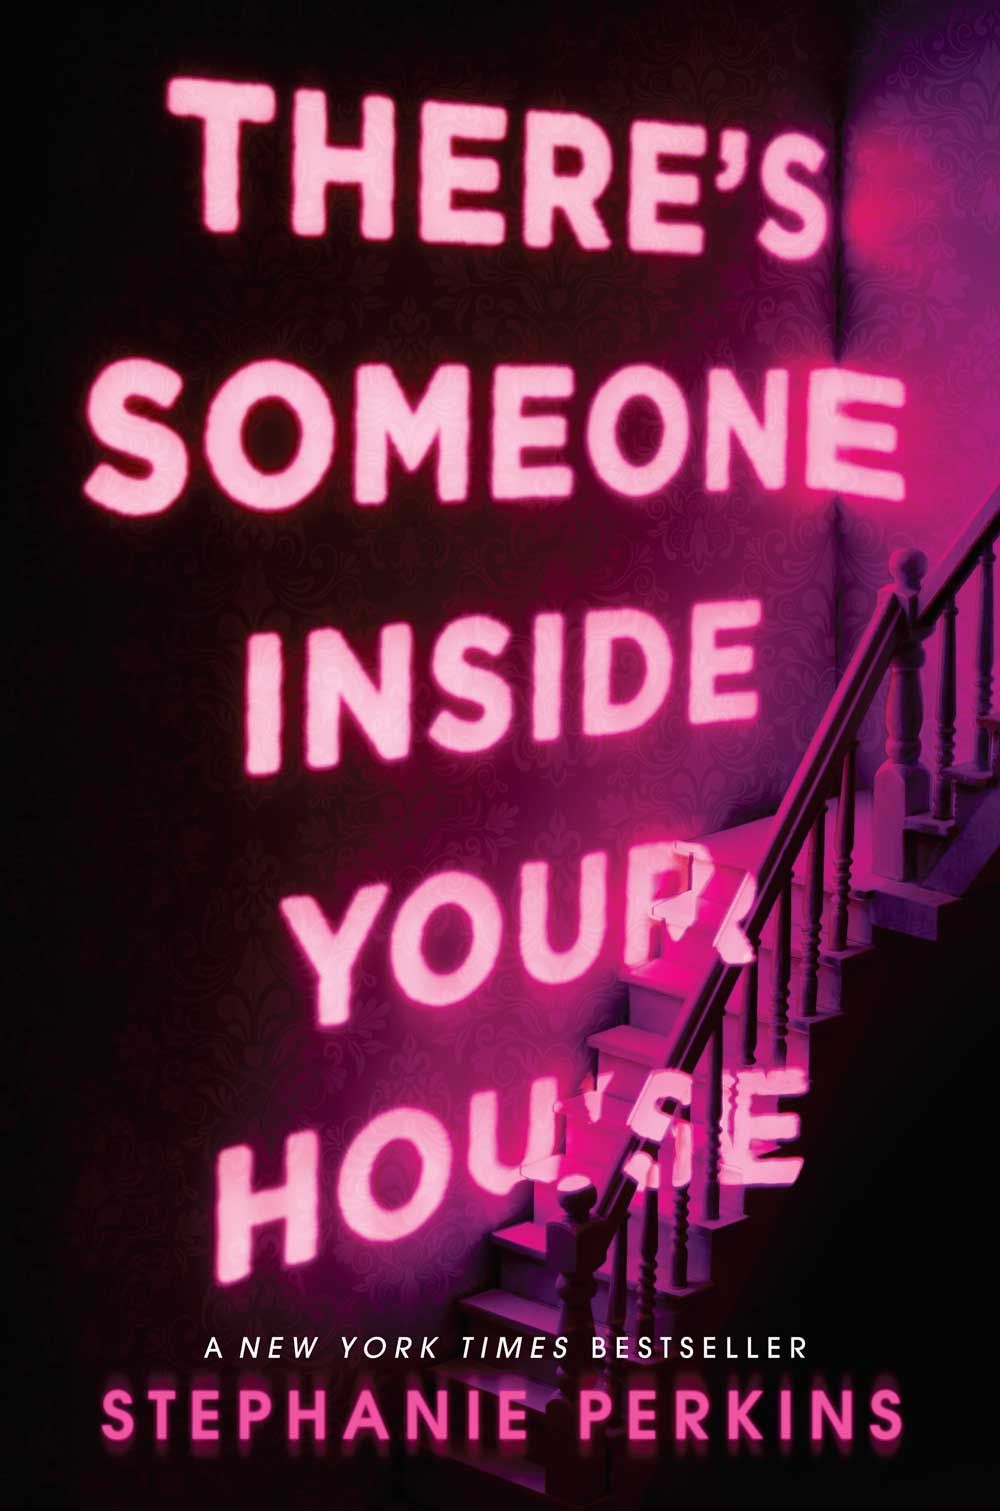 There's Somone Inside Your House